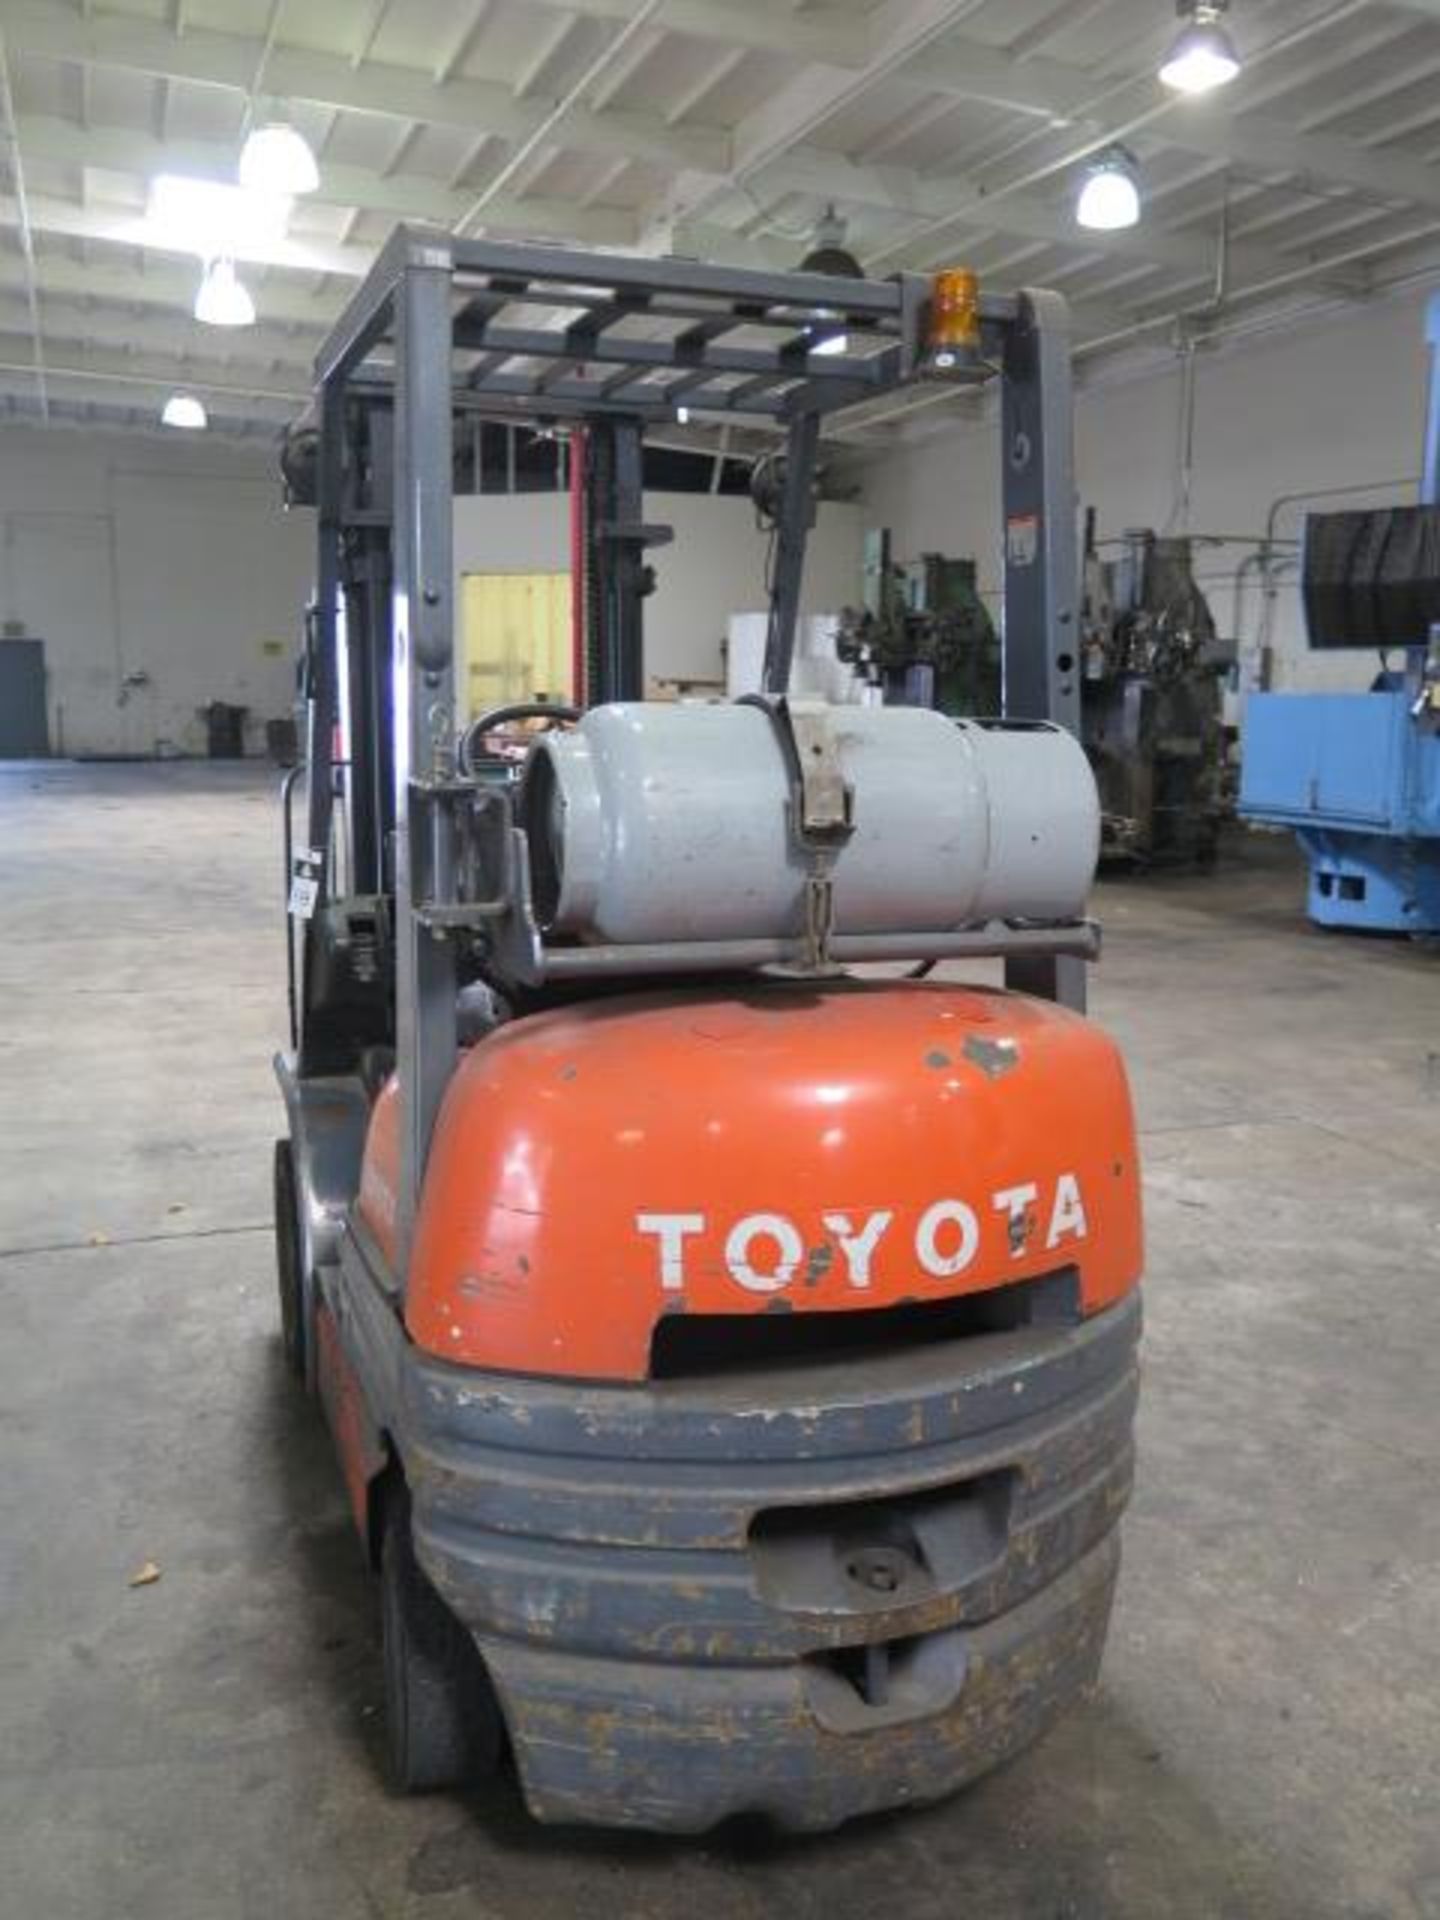 Toyota 42-6FGC20 4400 Lb Cap LPG Forklift s/n 61557 w/ 2-Stage Mast, 130” Lift Height, SOLD AS IS - Image 2 of 13